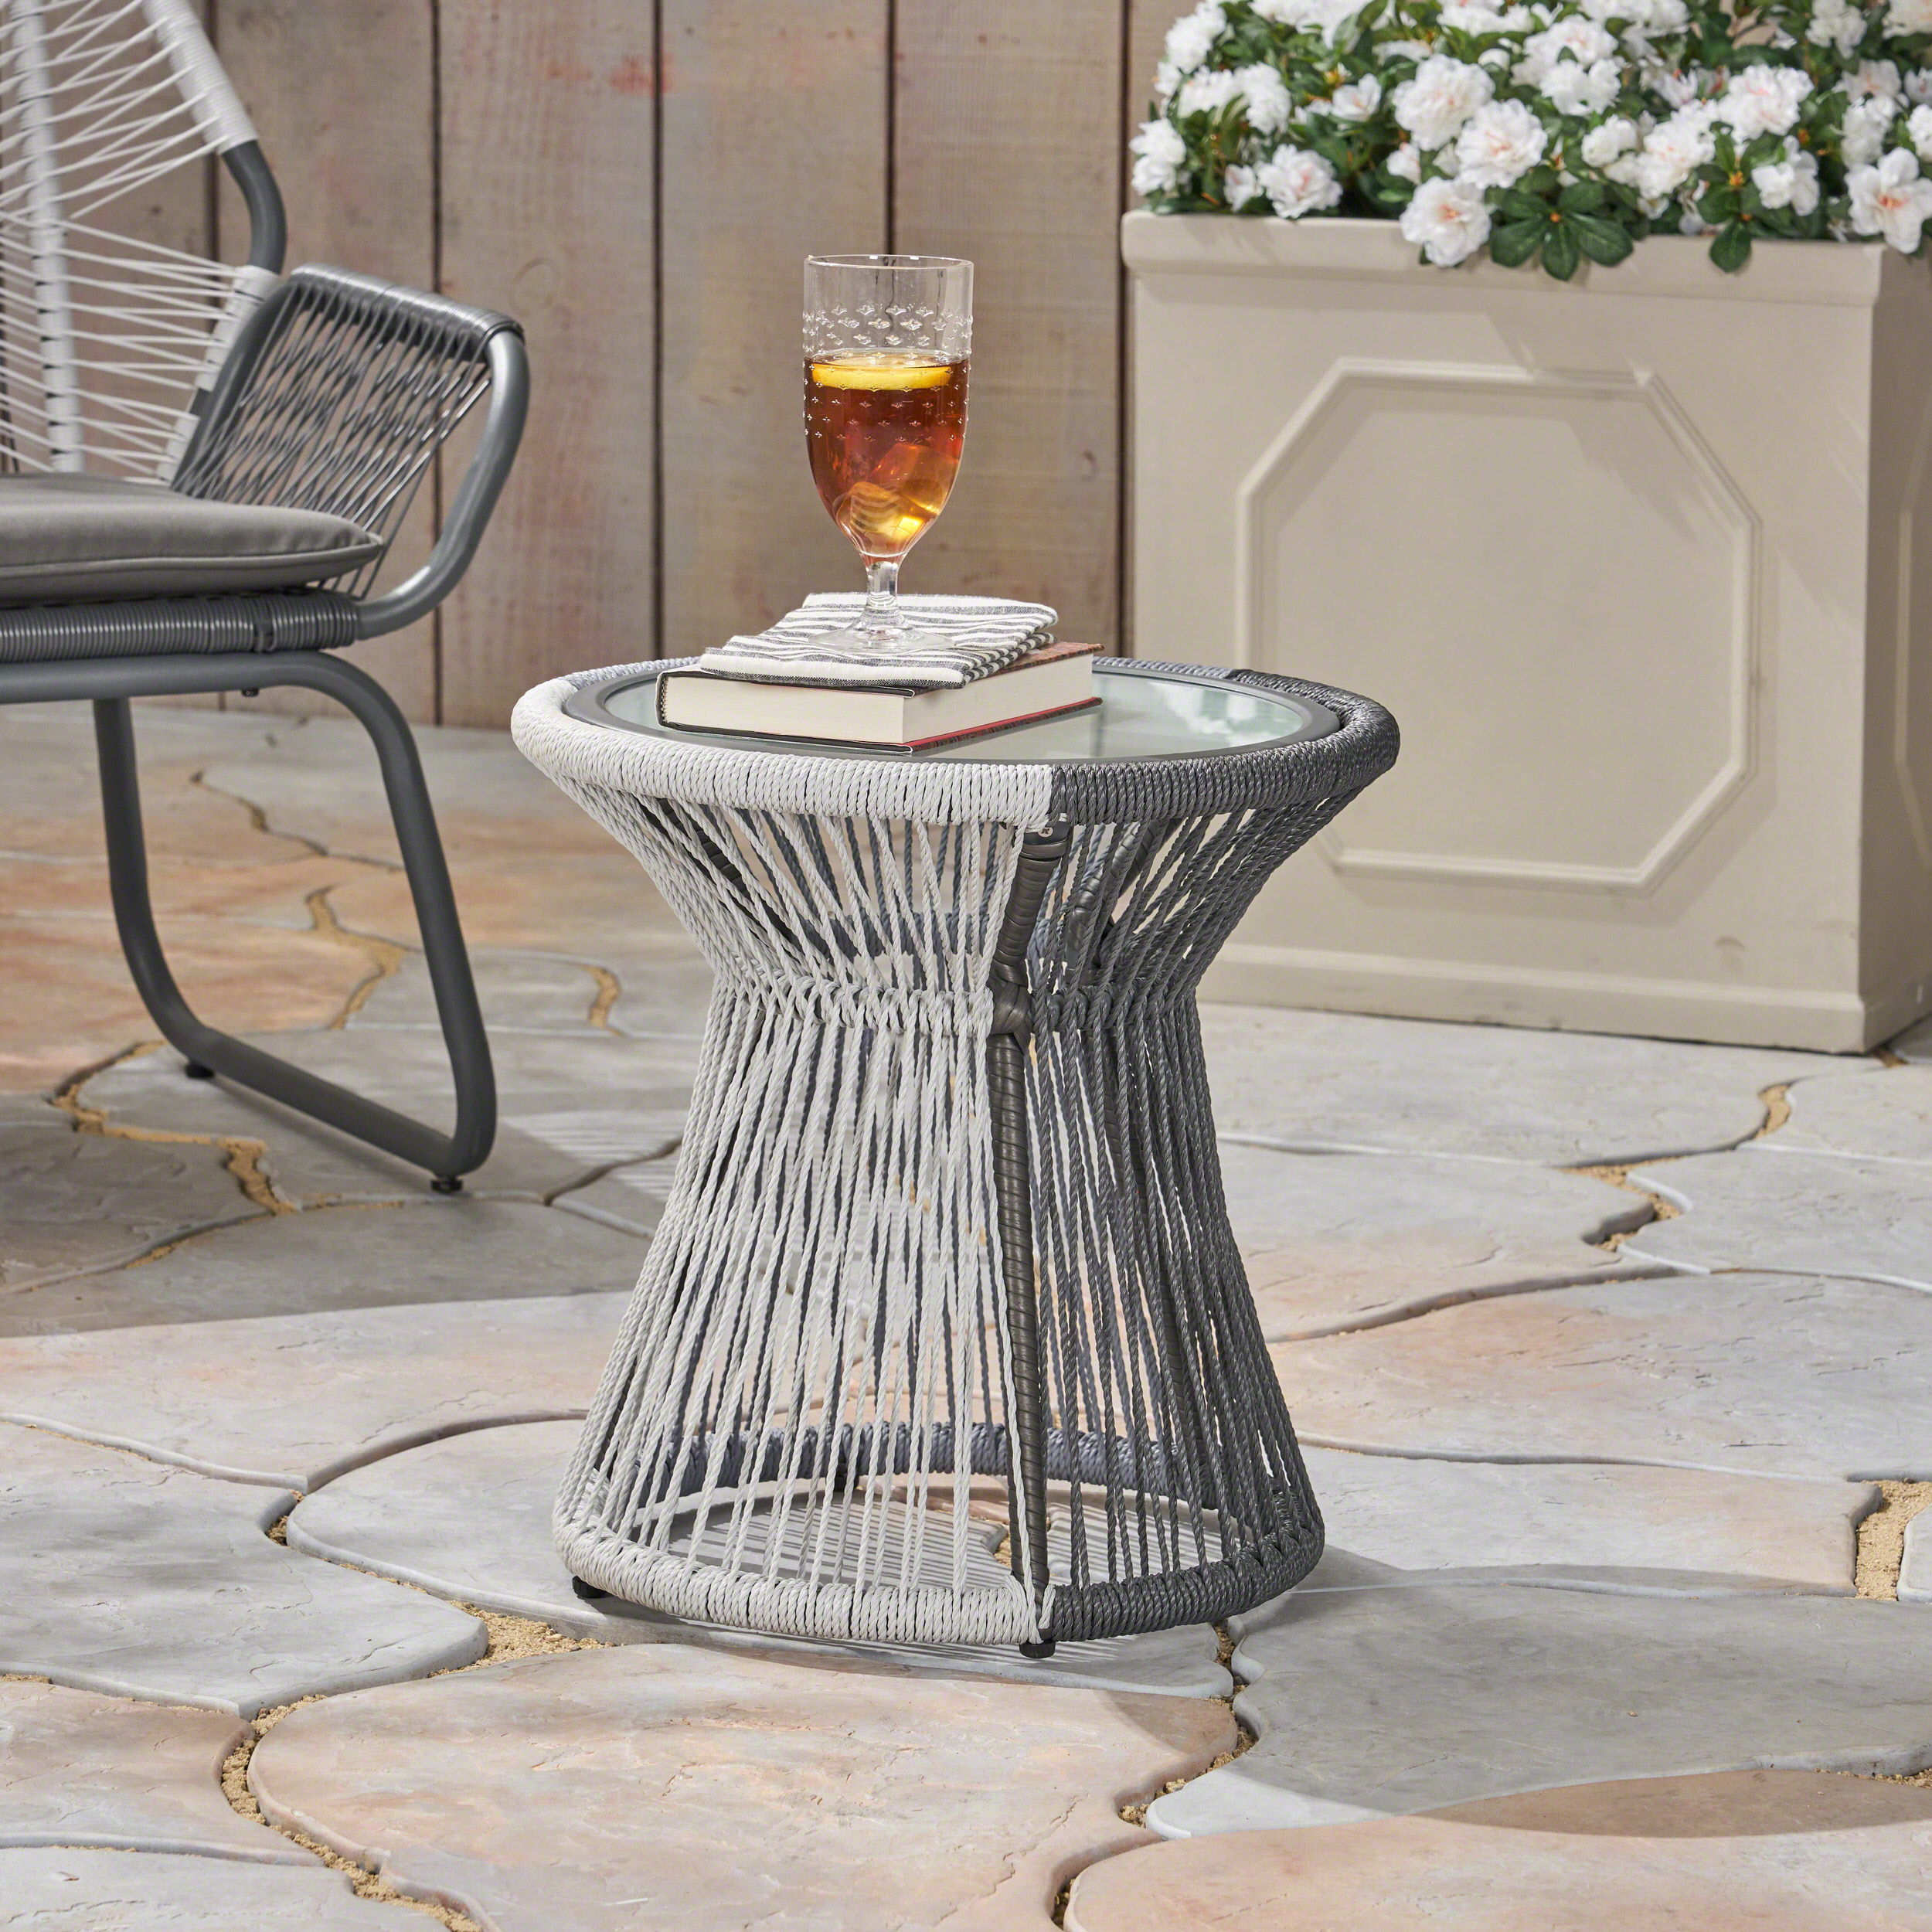 Elian Outdoor Rope Woven Side Table with Tempered Glass Top, Gray, White - image 1 of 5